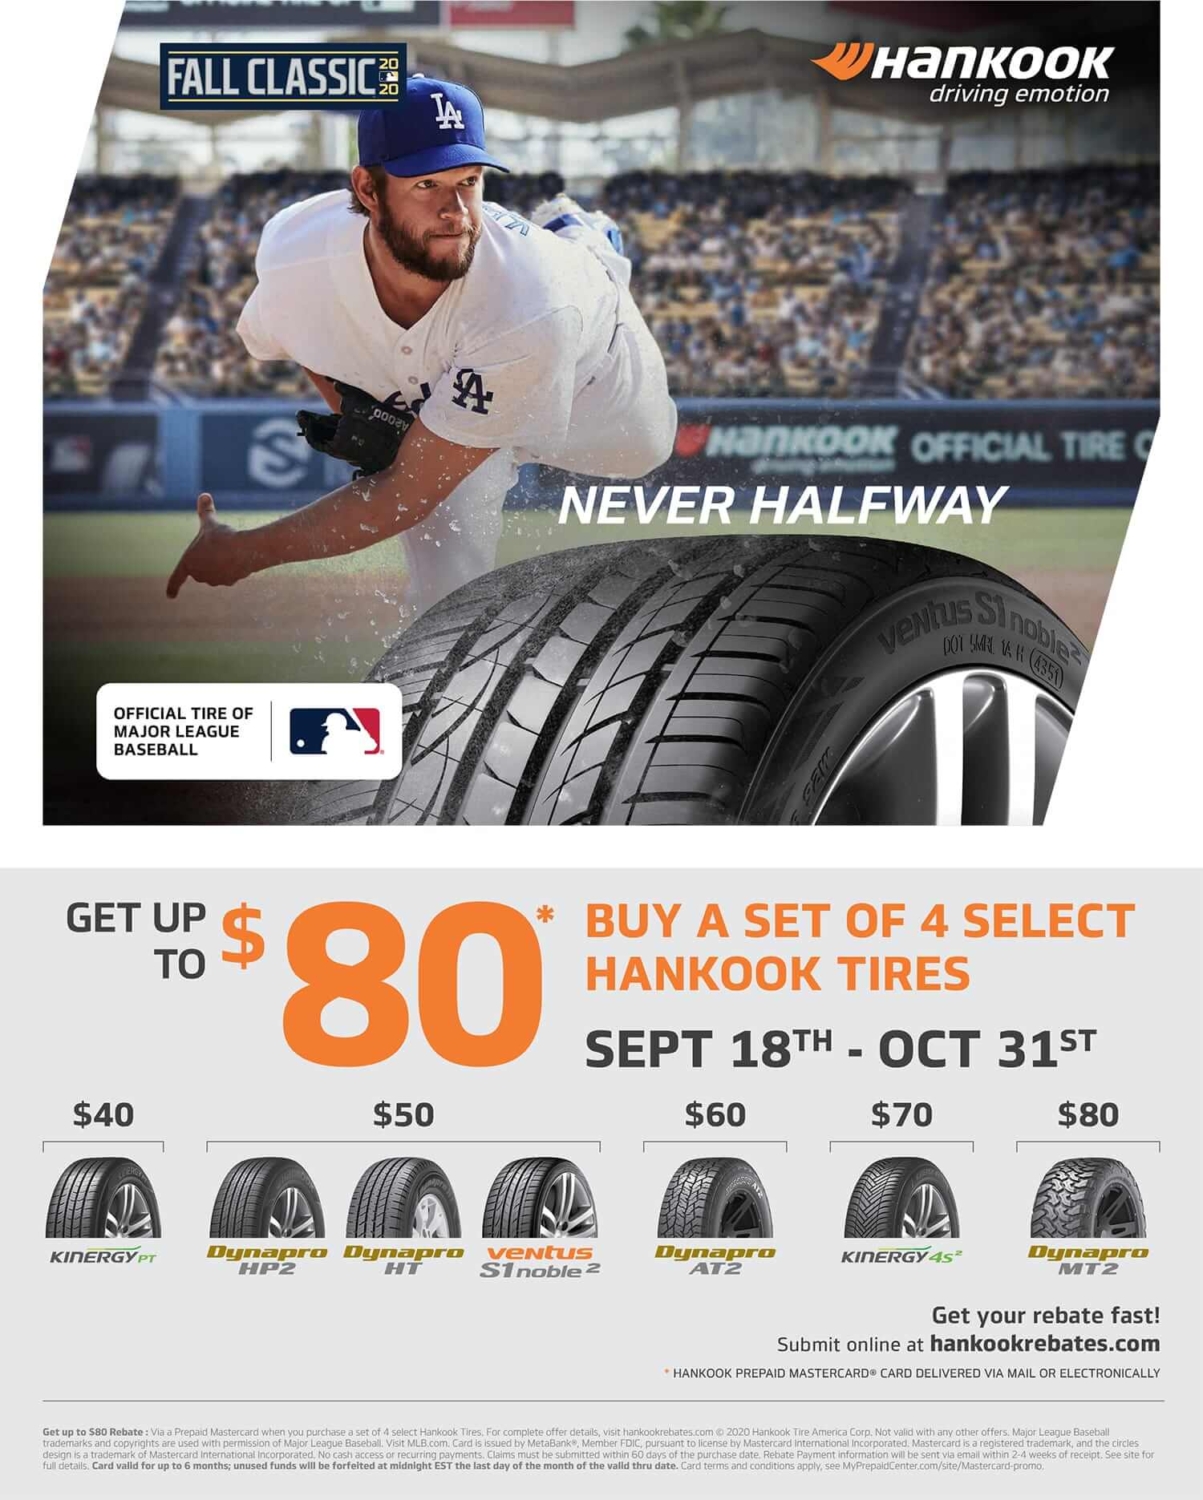 Hankook Tire Promotion Save Up To 80 After Mail in Rebate Kubly s Automotive